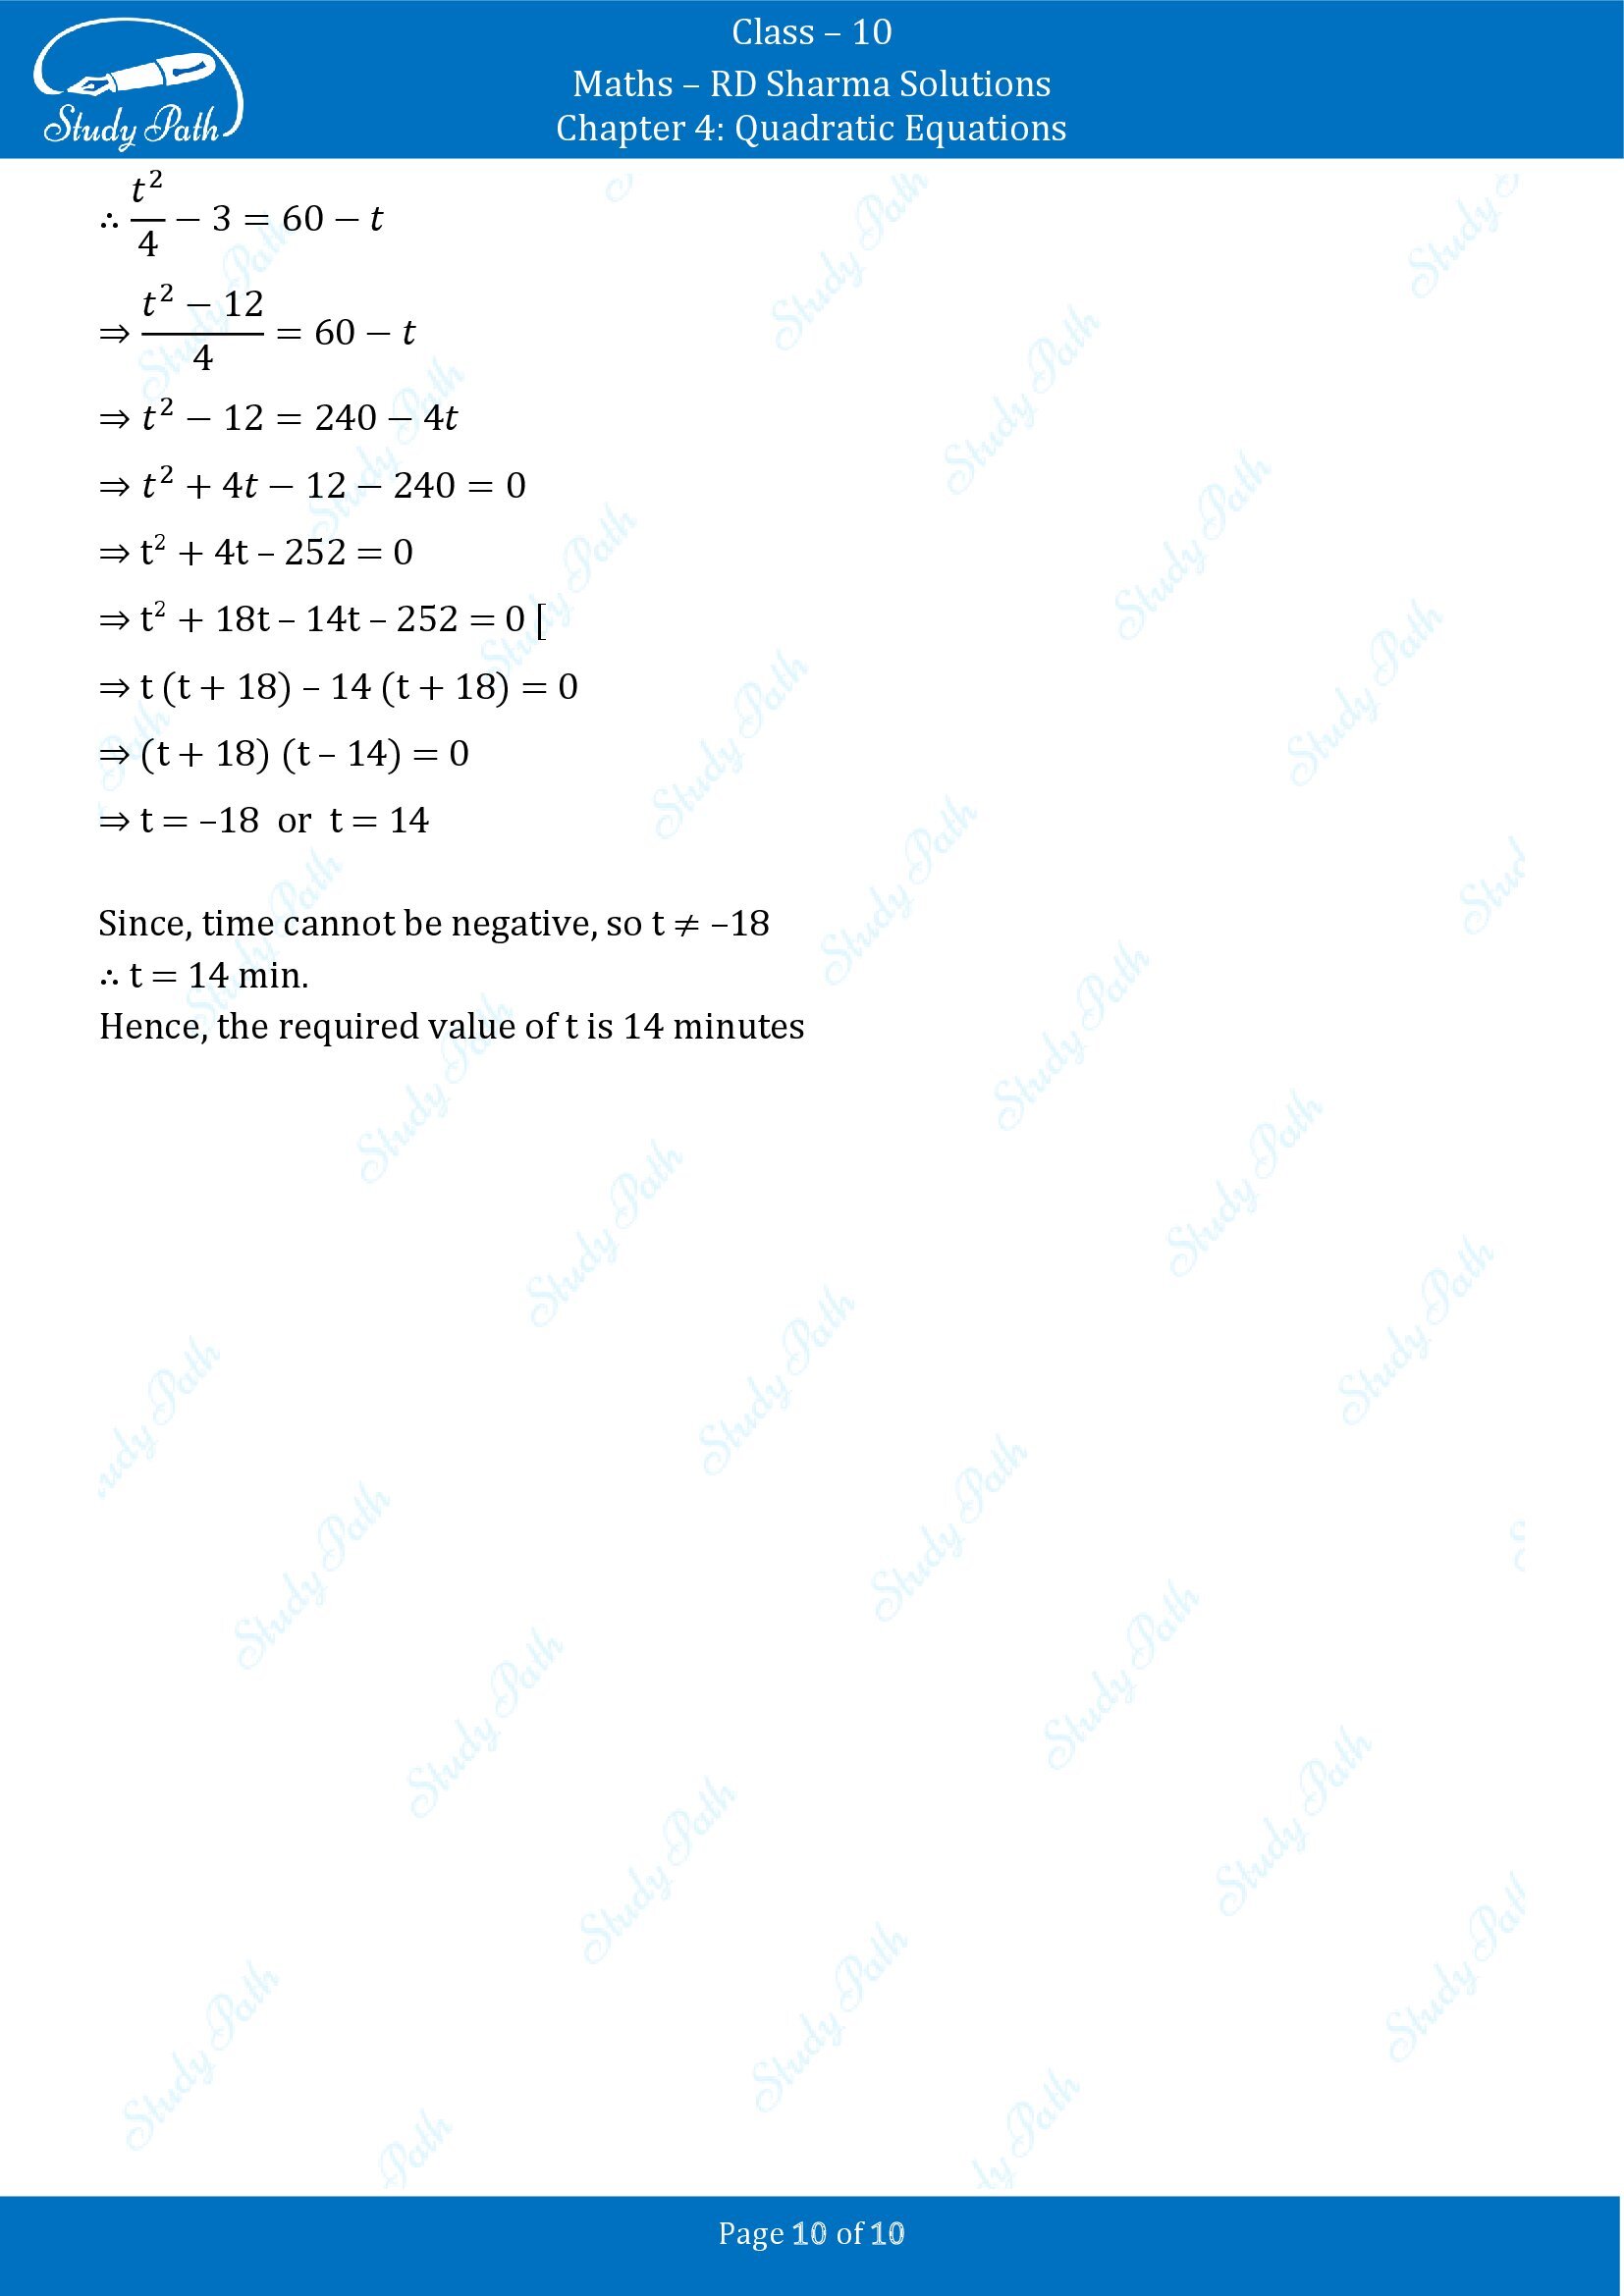 RD Sharma Solutions Class 10 Chapter 4 Quadratic Equations Exercise 4.13 00010